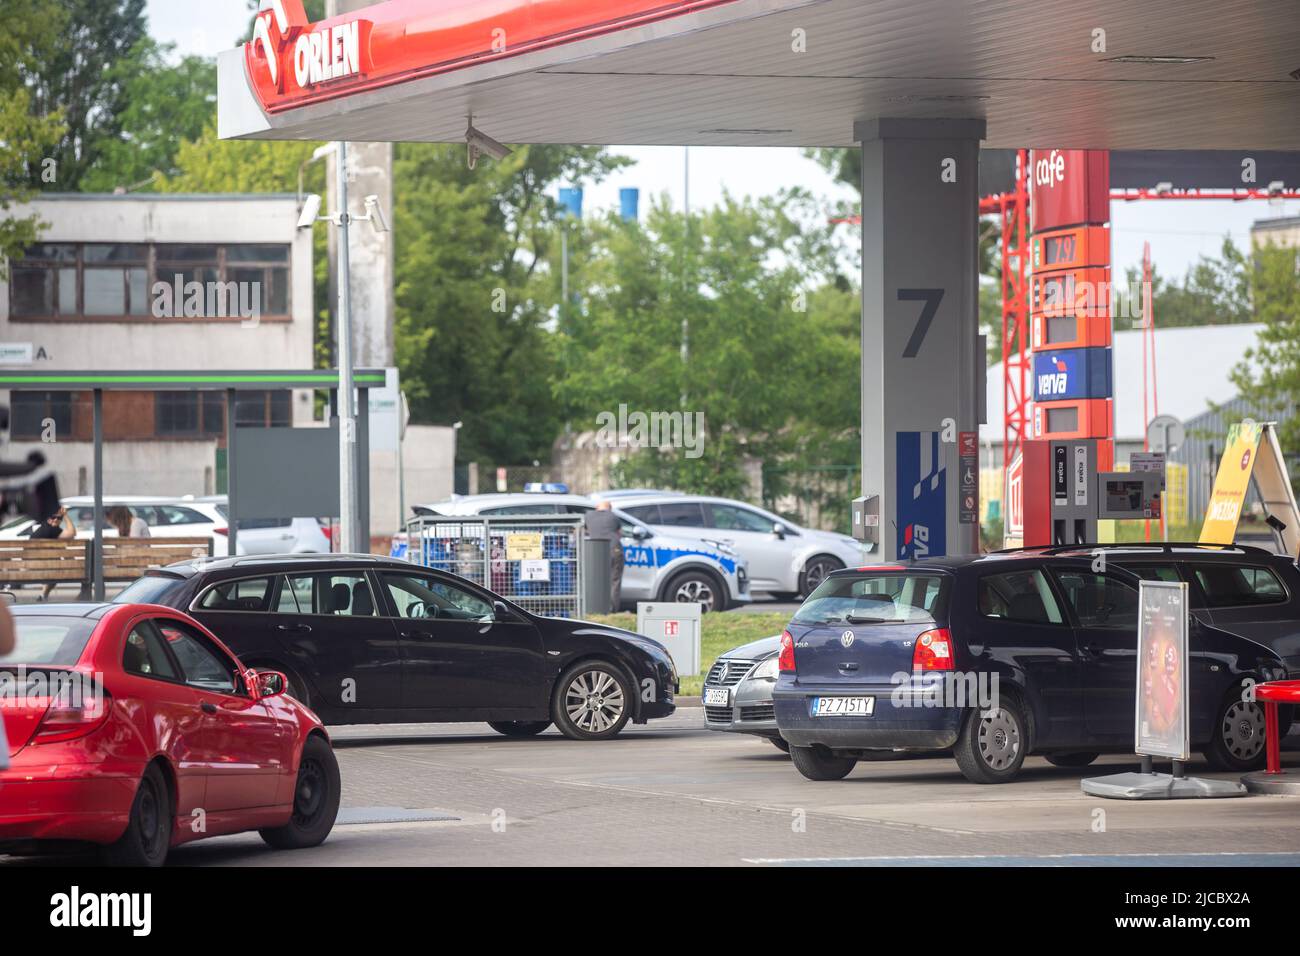 Poznan, Poland. 11th June, 2022. Drivers blocking 'Orlen' gas station in protest against high fuel prices. Credit: catwalkphotos/Alamy Live News Stock Photo